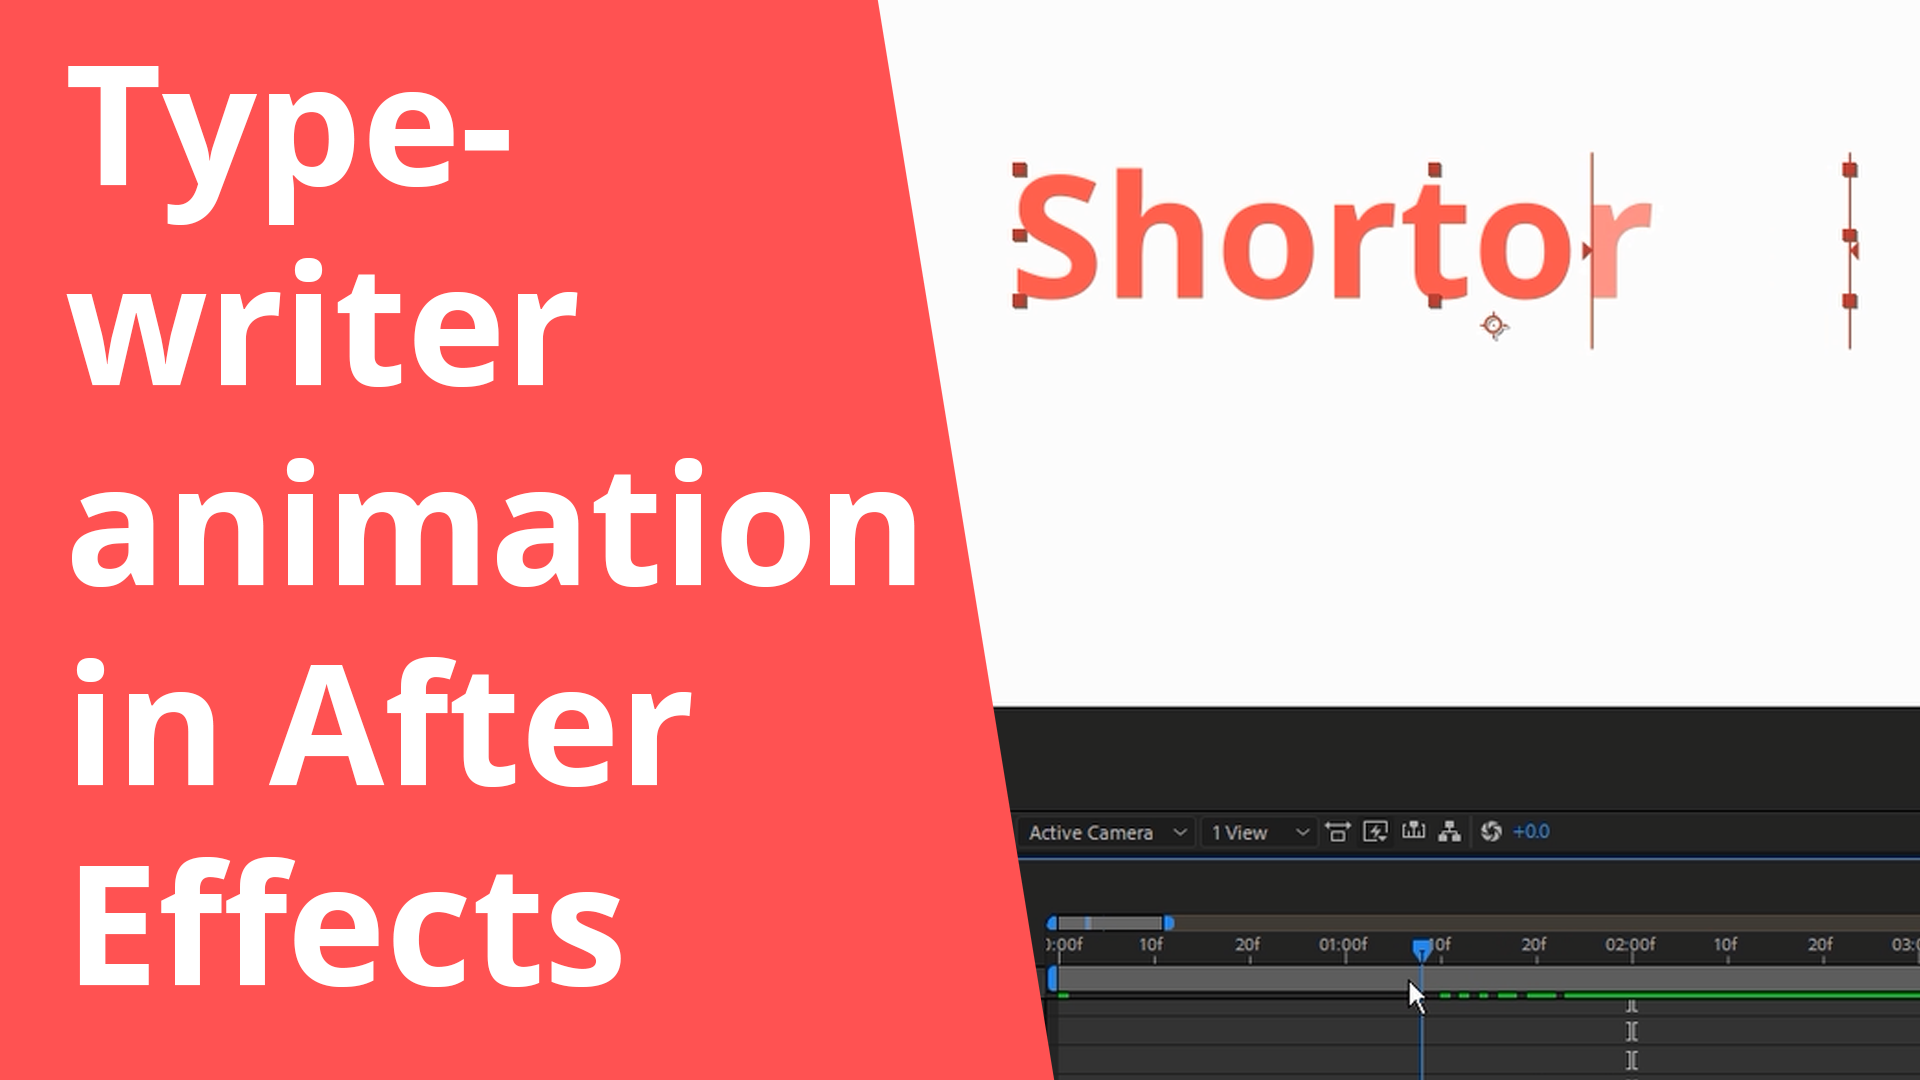 Typewriter animation in After Effects – Shortorial (Video)